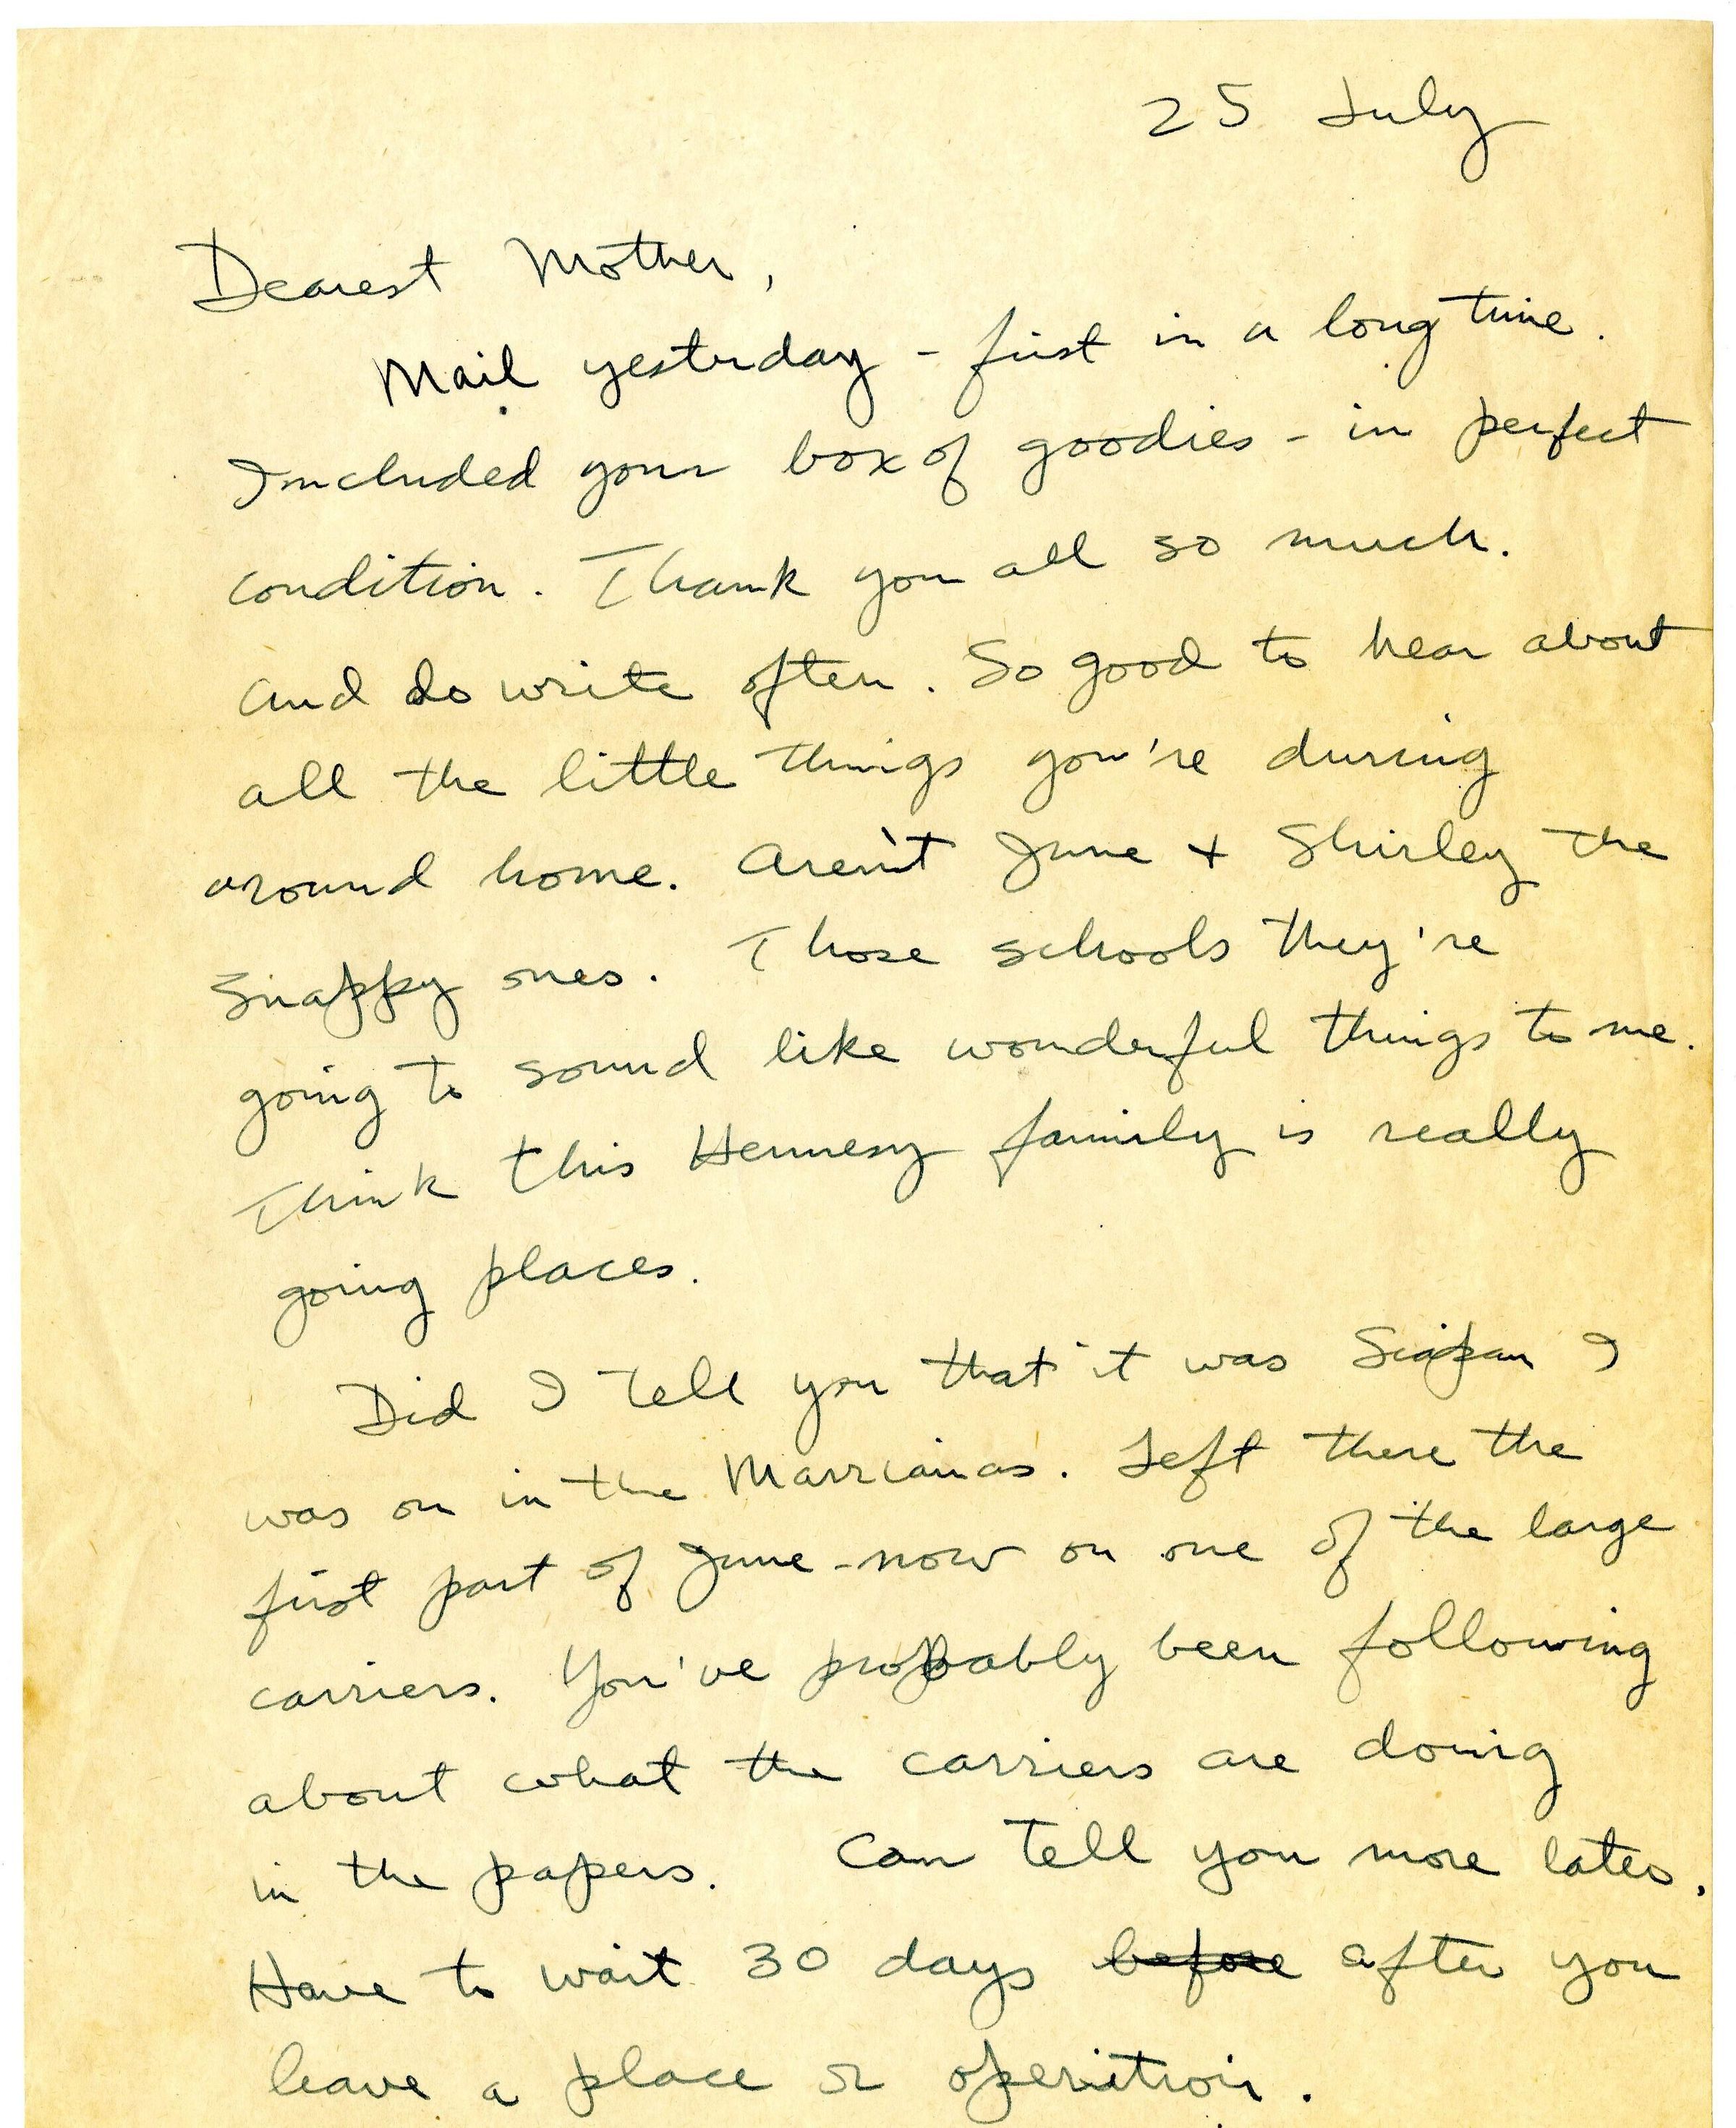 Primary Image of Letter from Lt. Gerald Hennesy to His Mother Dated July 25, 1945